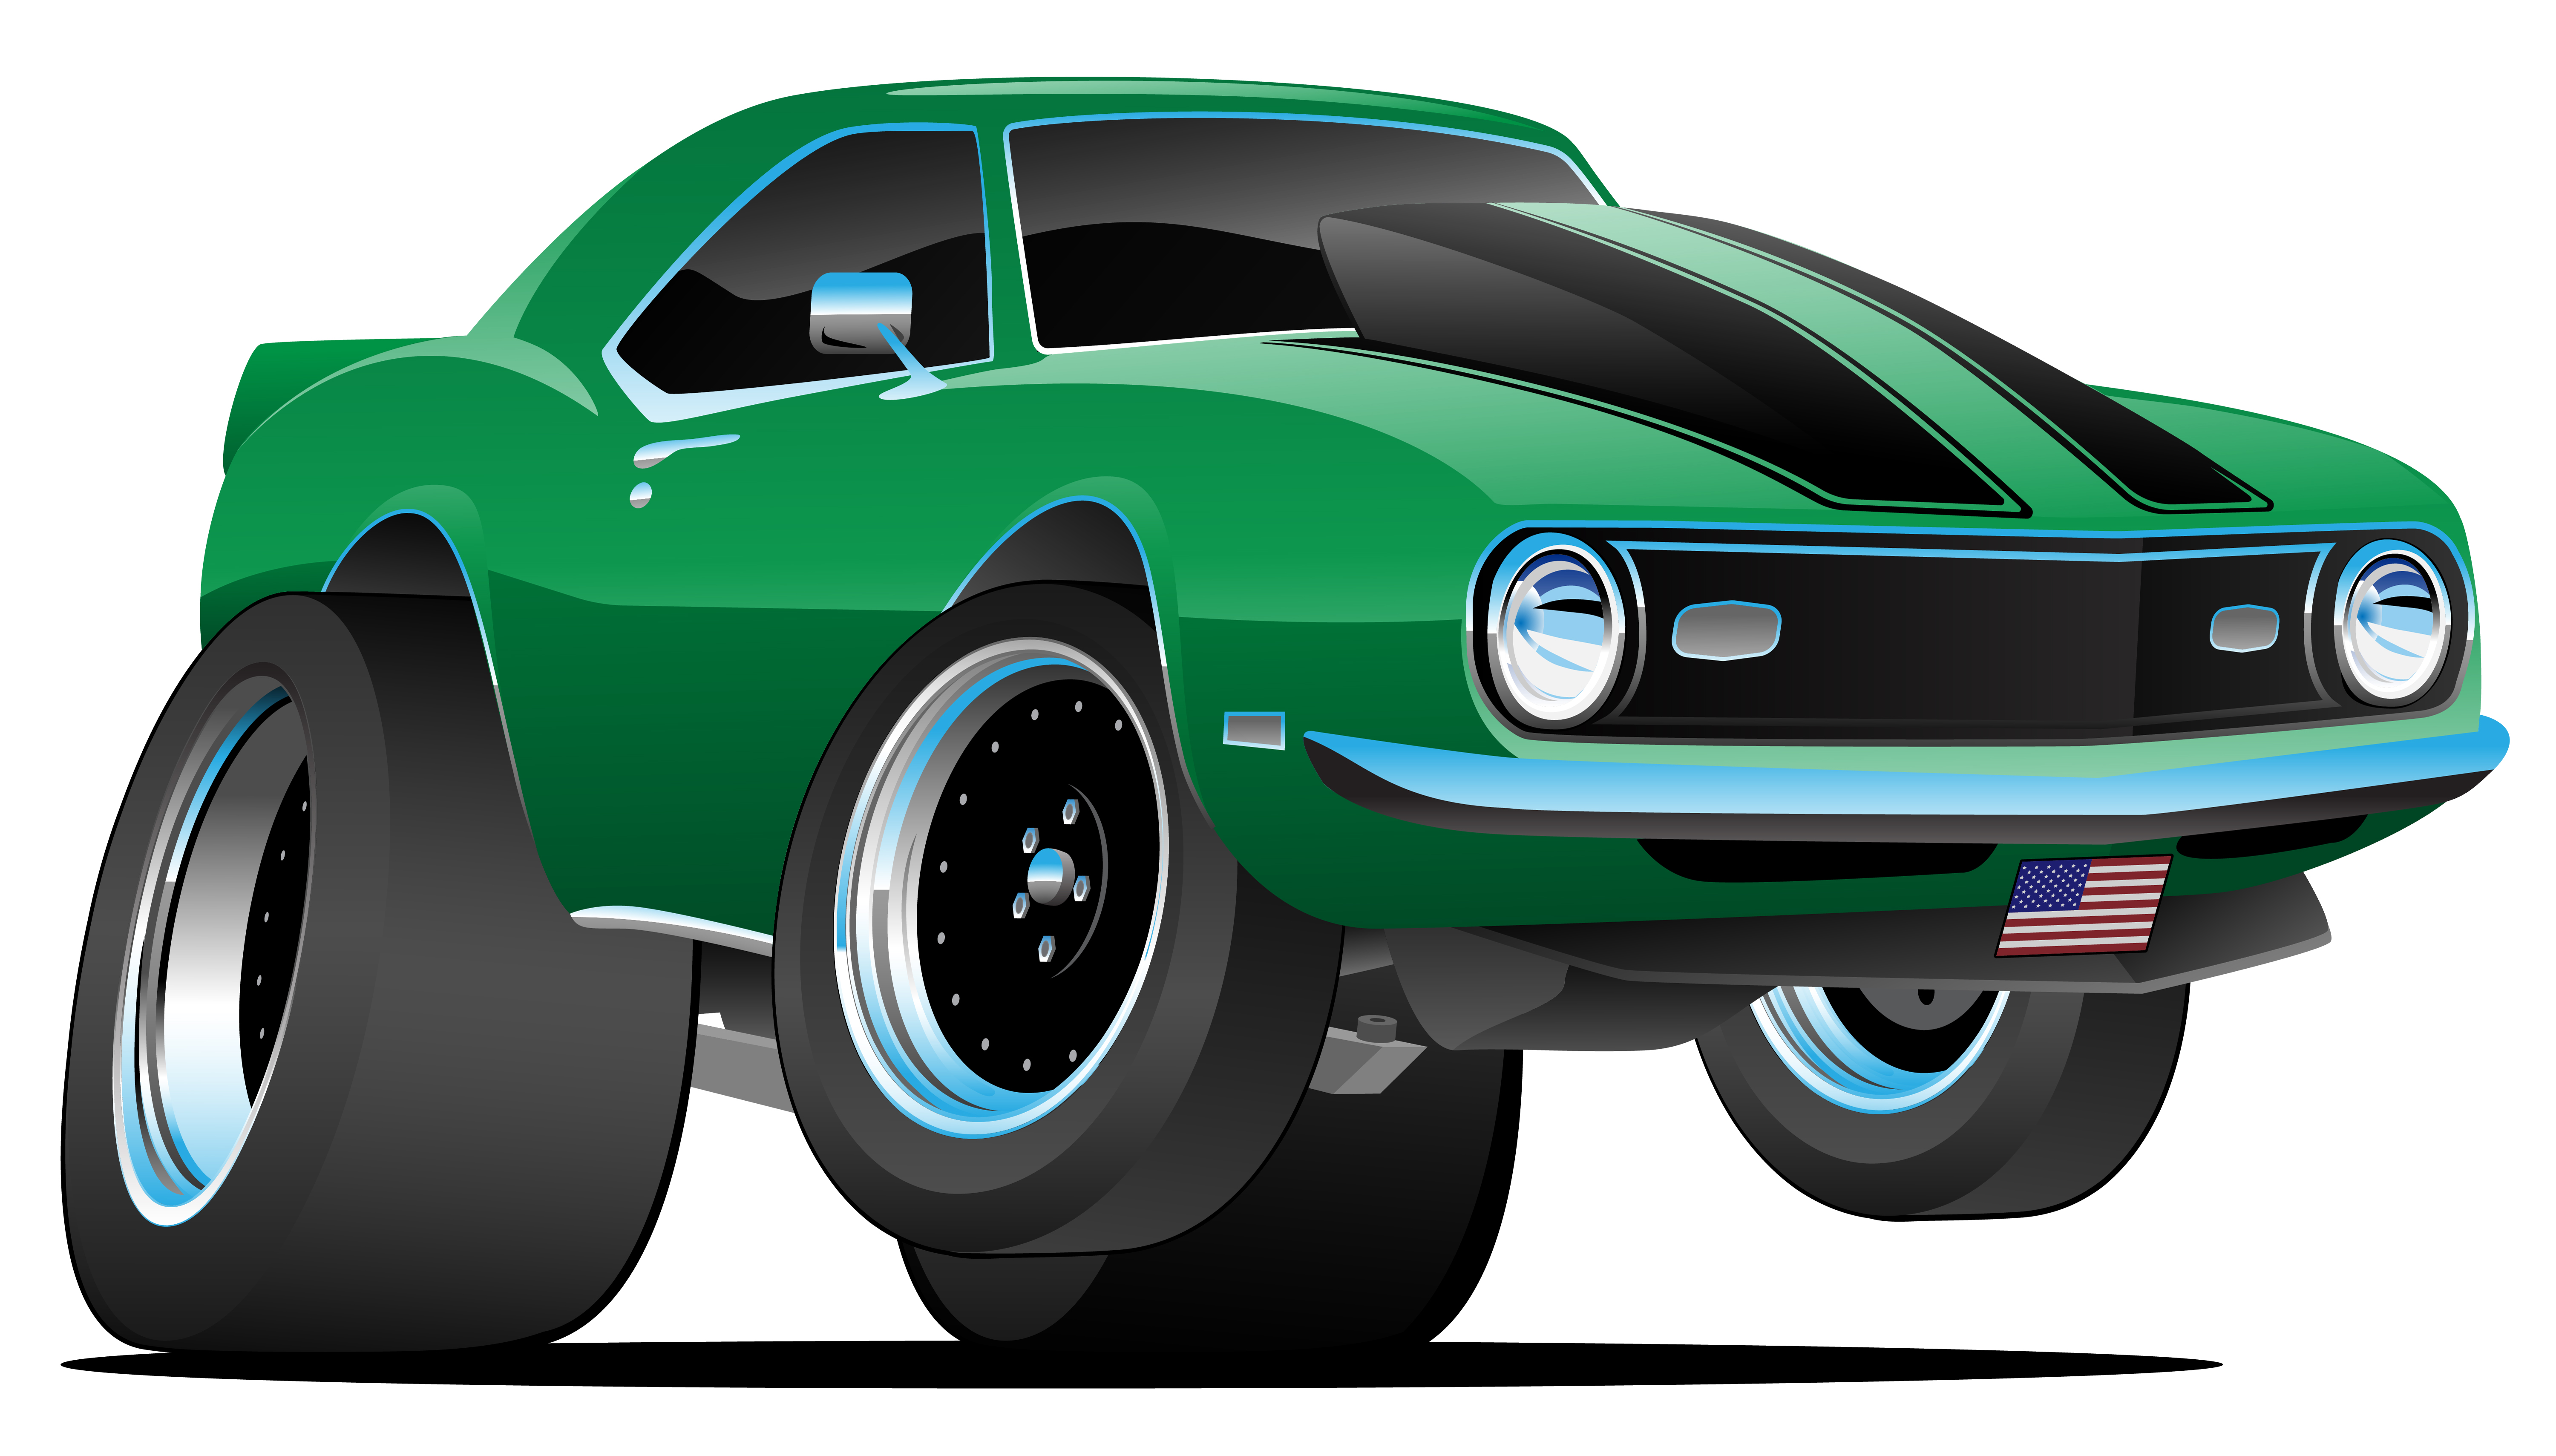 Classic Sixties Style American Muscle Car Cartoon Vector ...